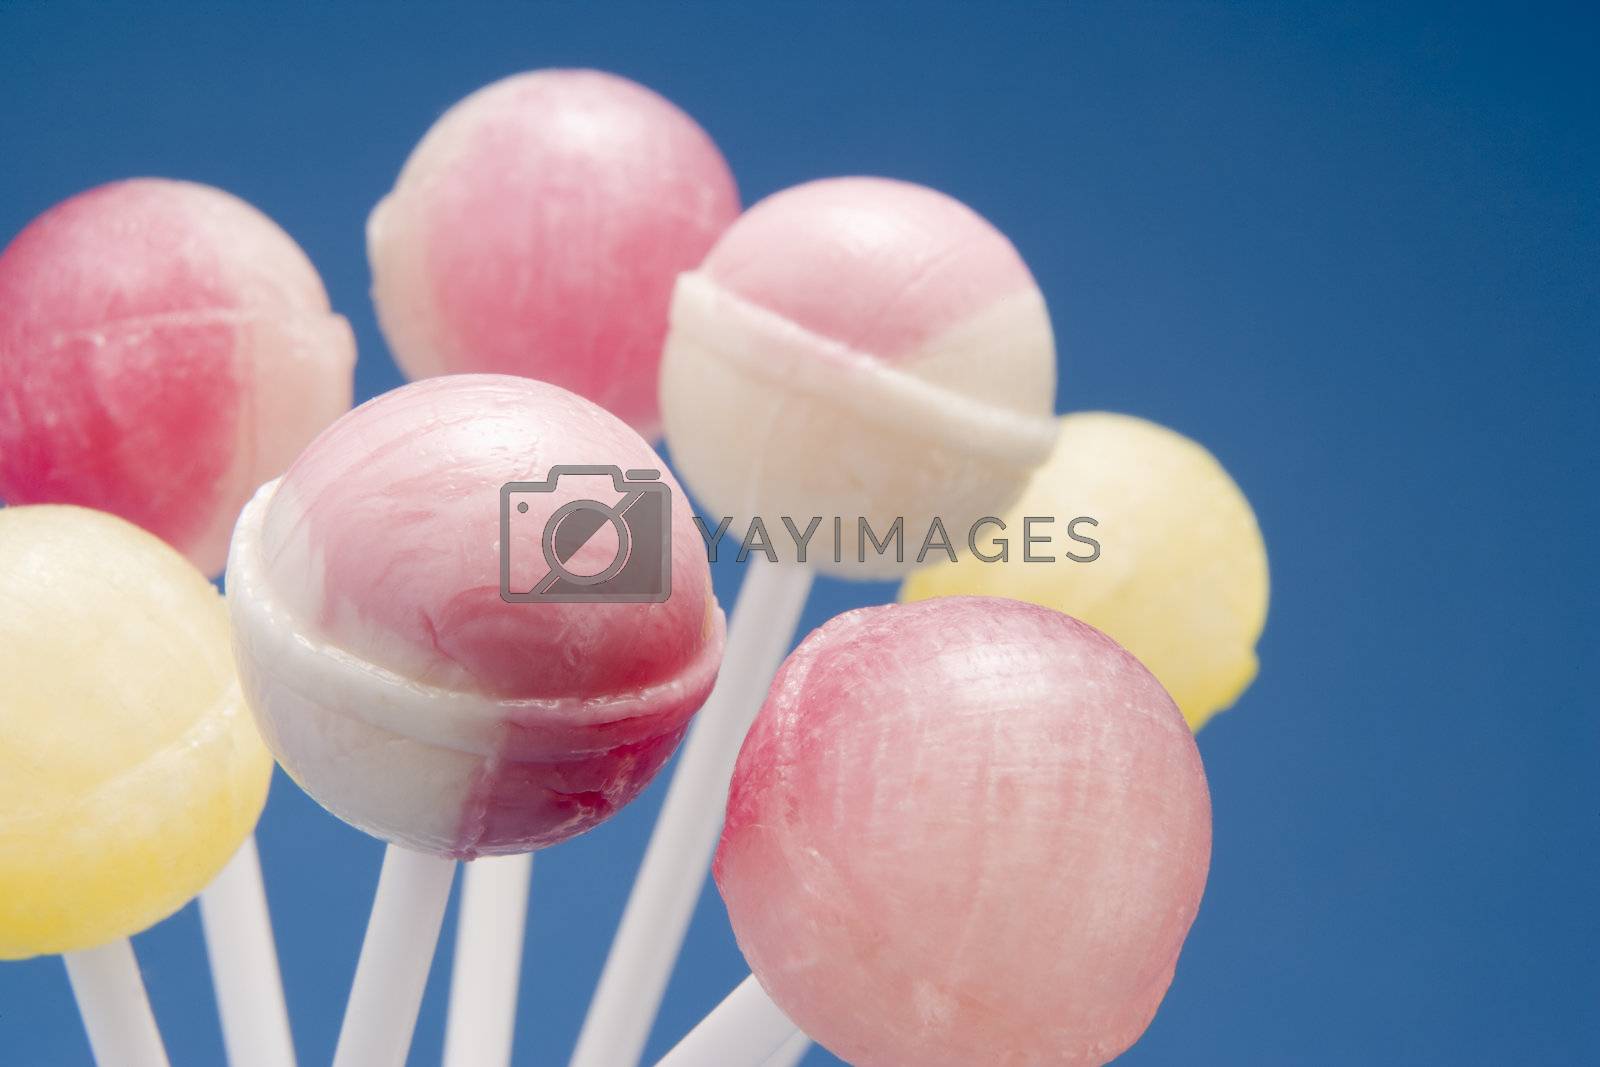 Royalty free image of Selection of Candy Lollipops by MonkeyBusiness